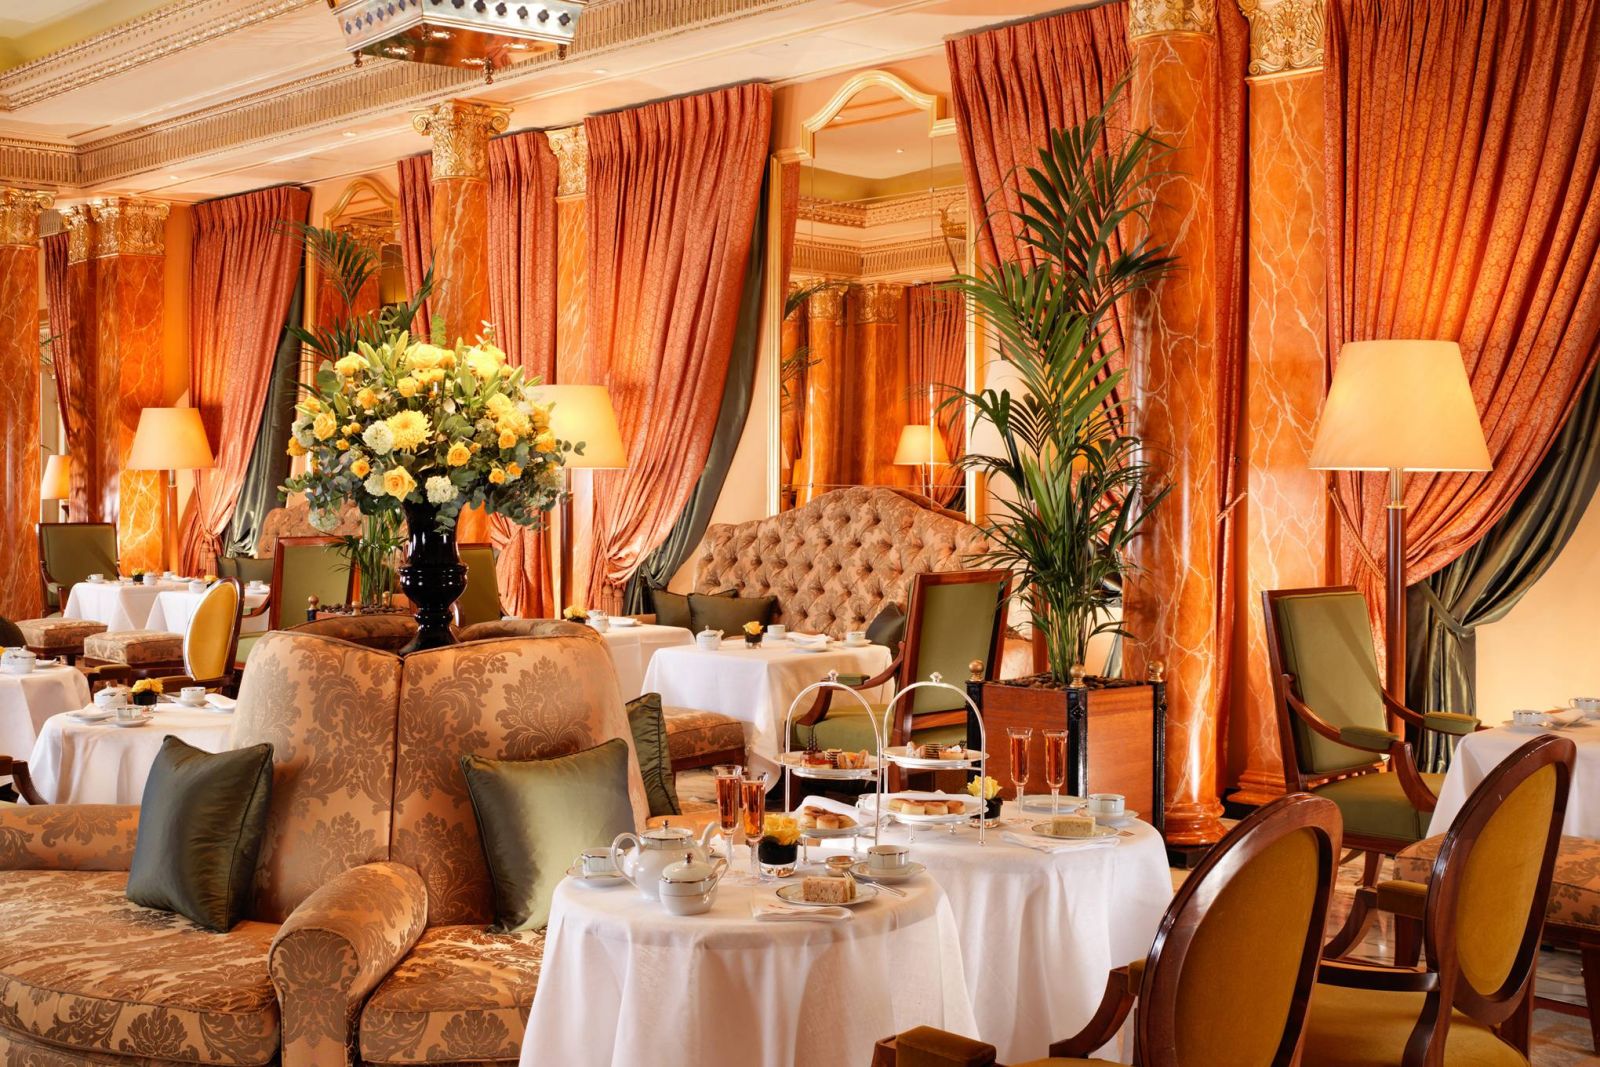 Although, if I had to choose, it would be The Dorchester for my favourite London afternoon tea venue